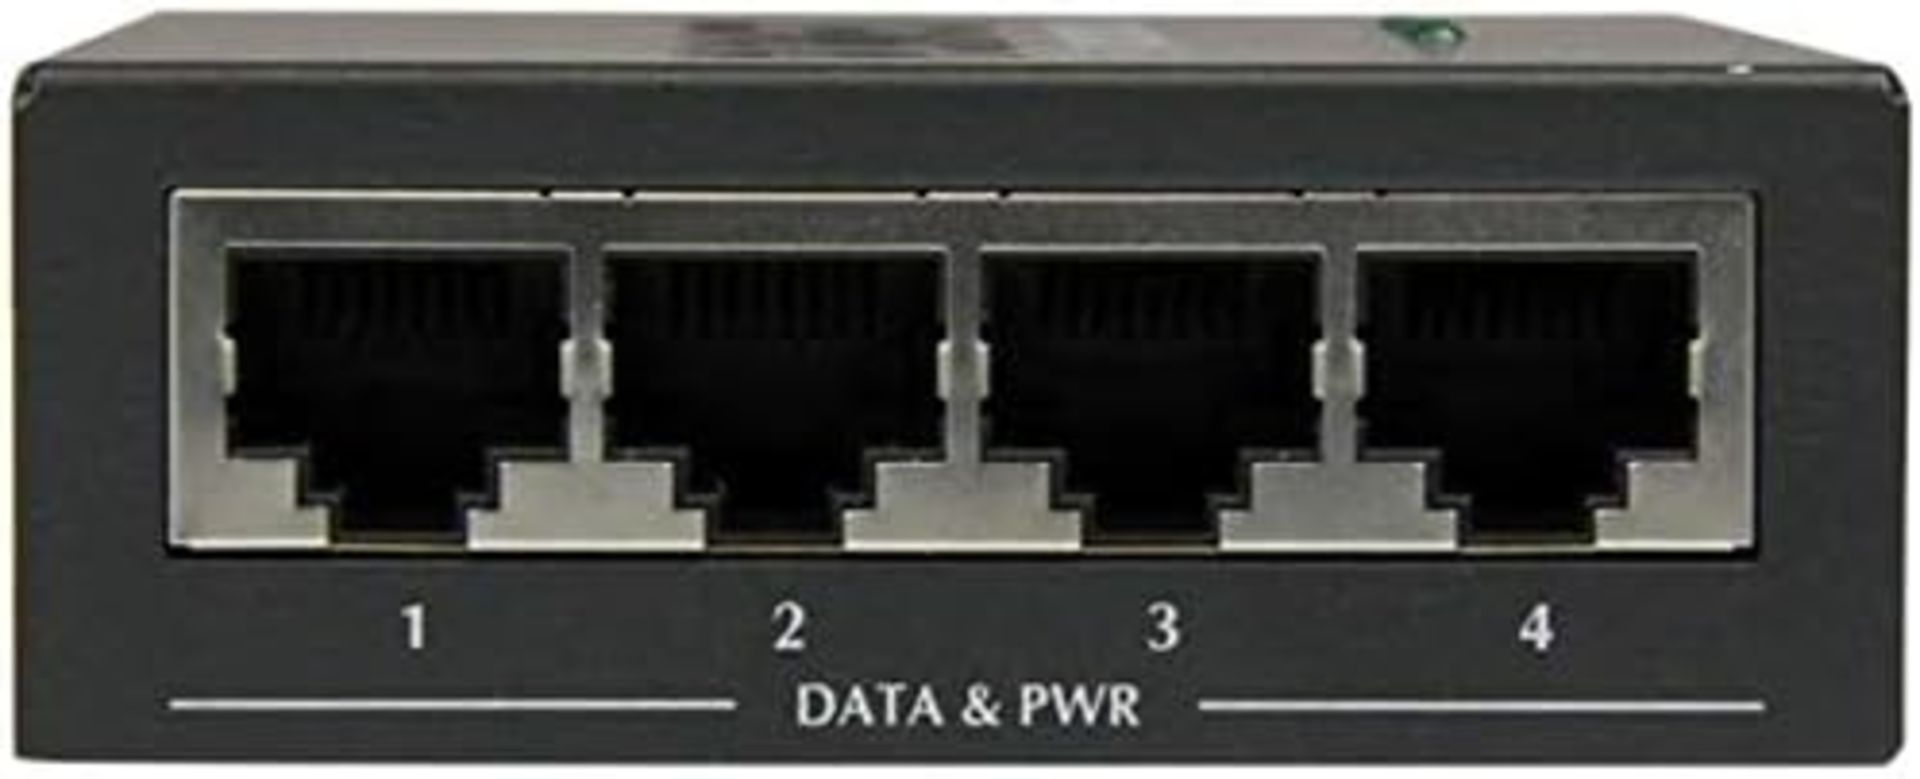 STARTECH 4 Port Gigabit Midspan - PoE+ Injector. RRP £208. More power, with less cost and hassle. - Image 3 of 5